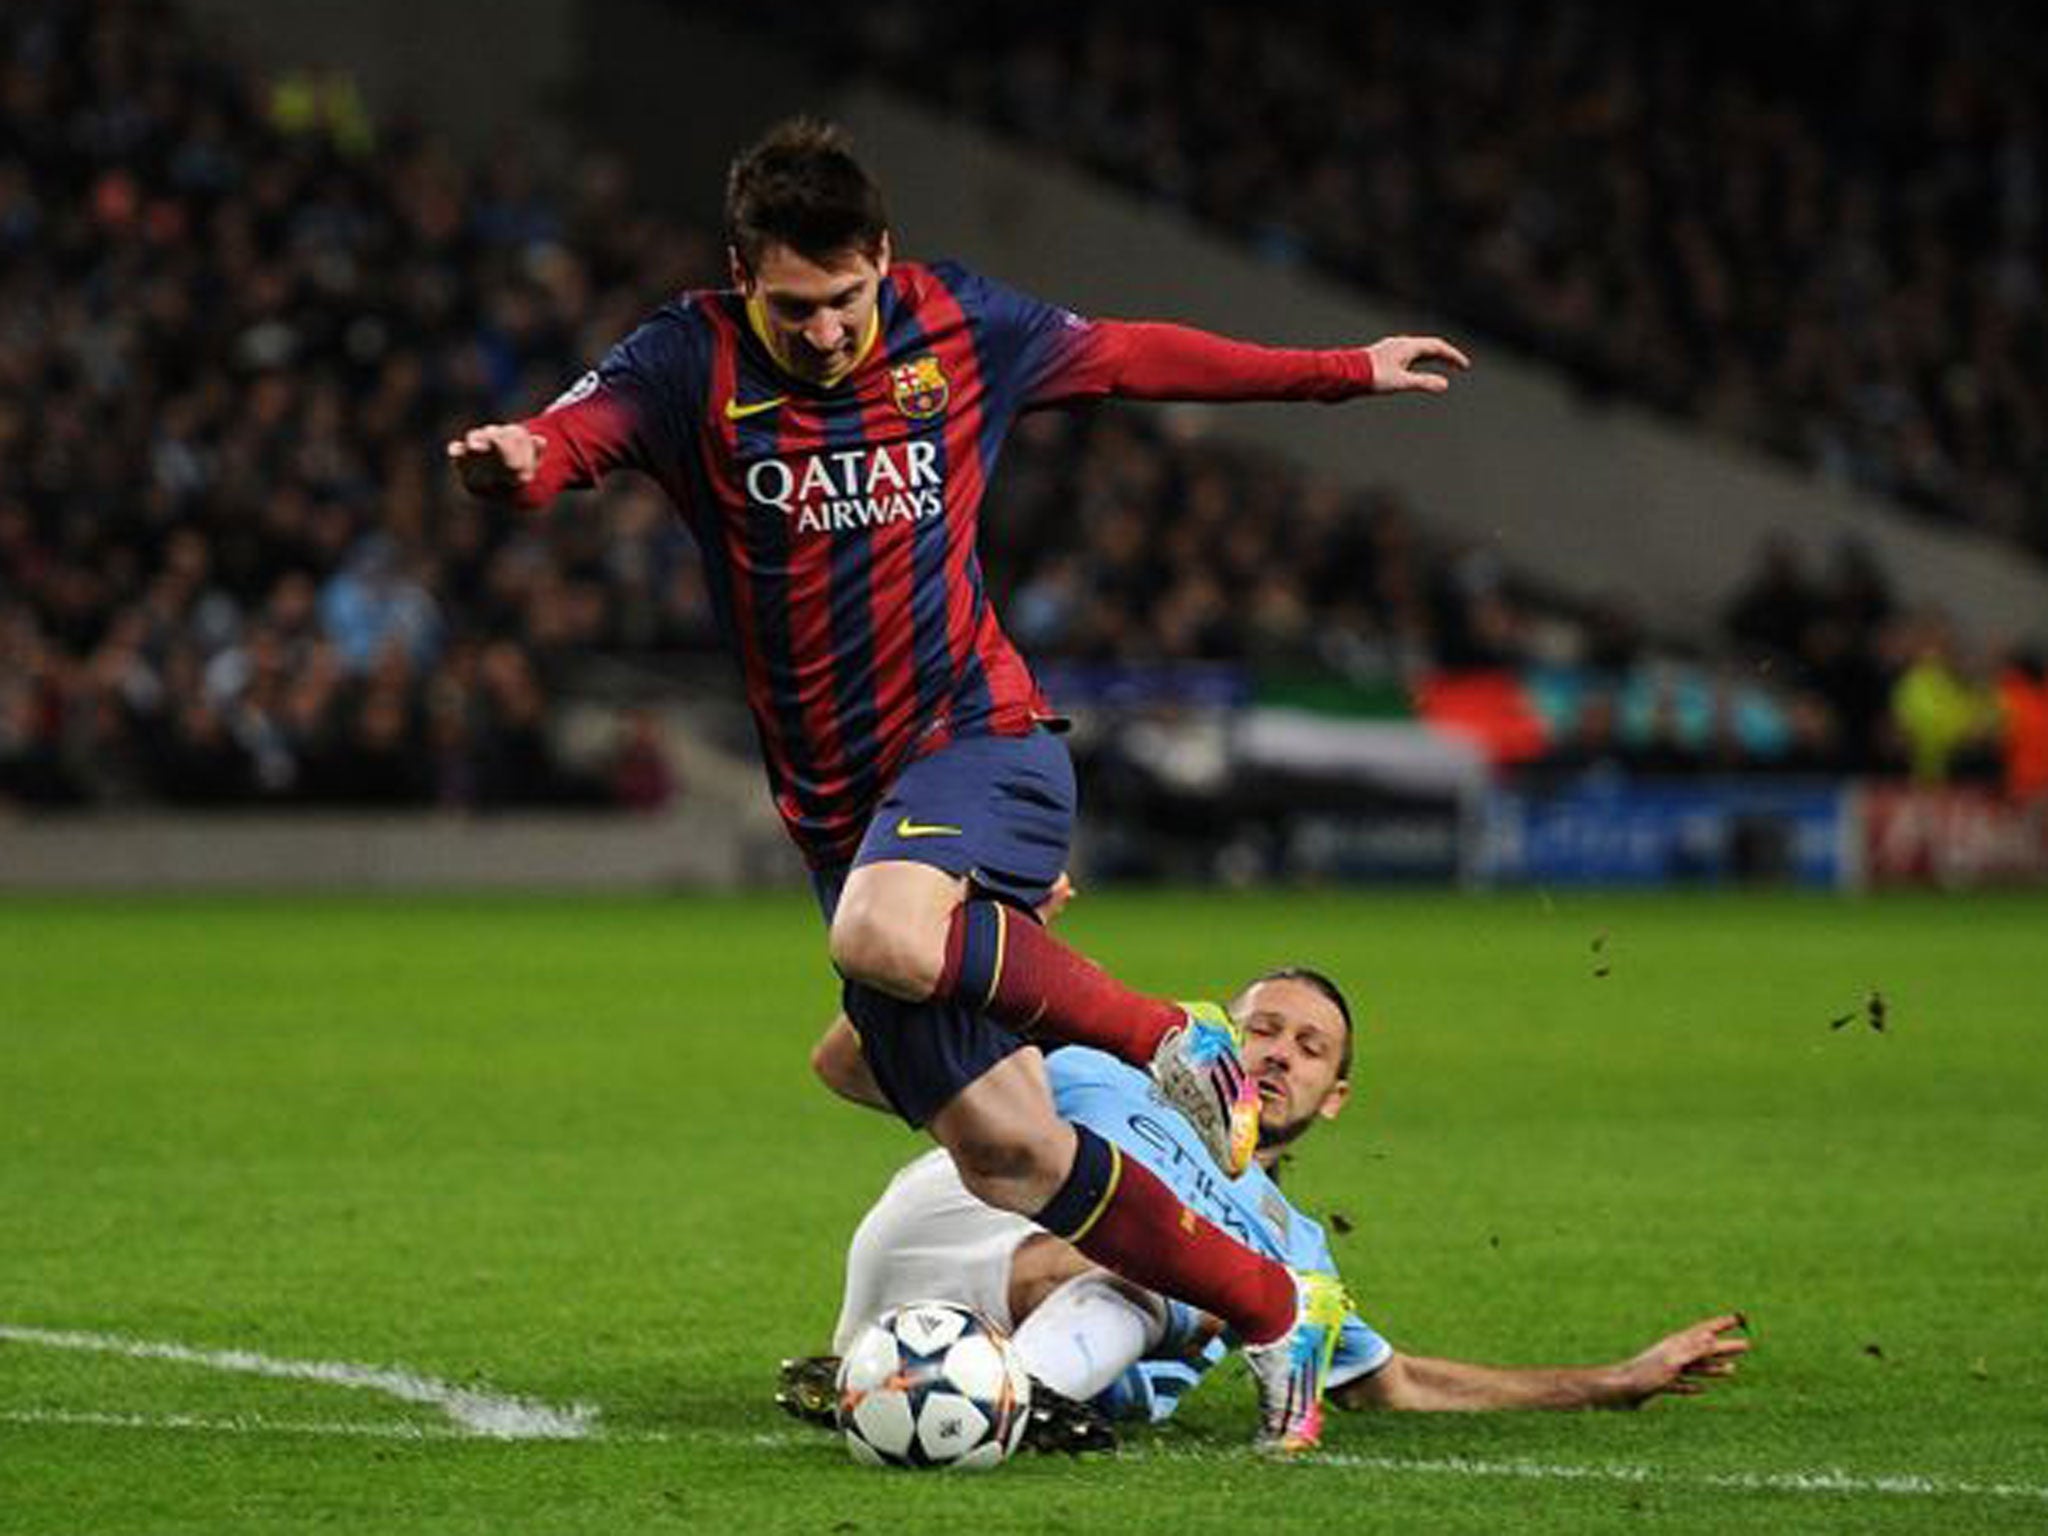 Martin Demichelis brings down Lionel Messi to concede a penalty